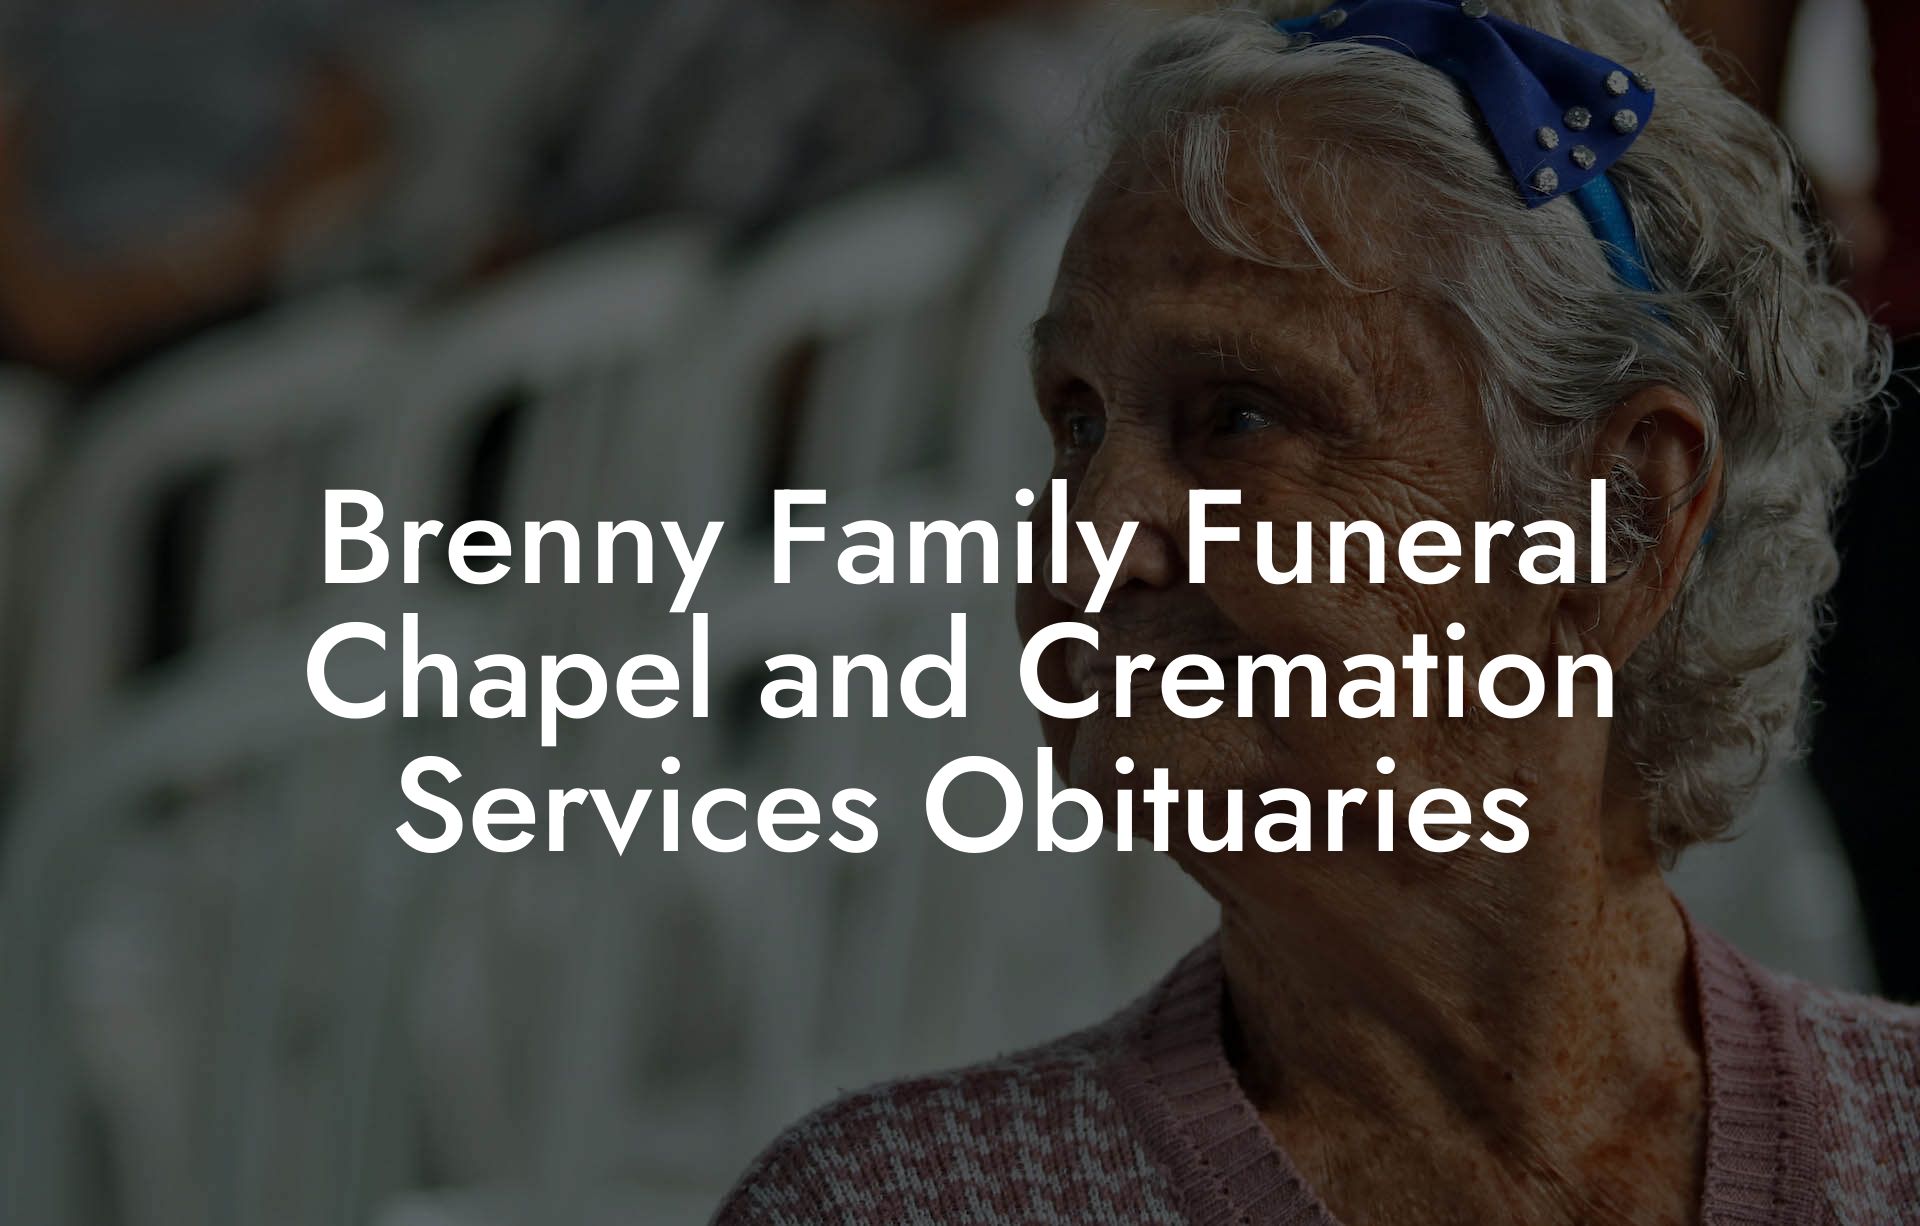 Brenny Family Funeral Chapel and Cremation Services Obituaries